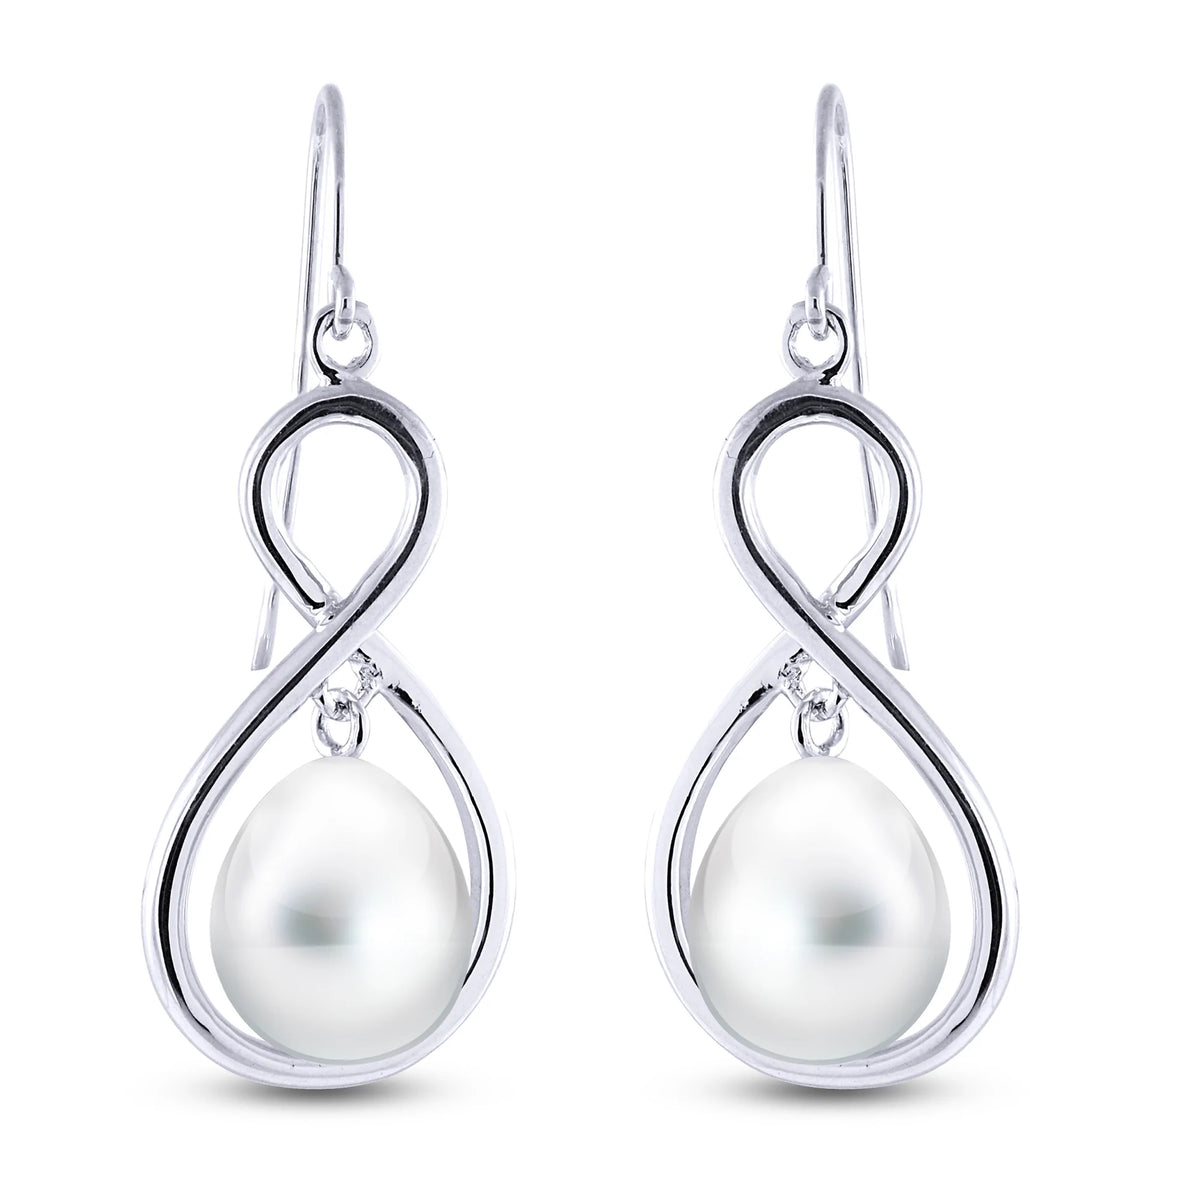 Sterling Silver Pearl Drop Earrings with French Wires